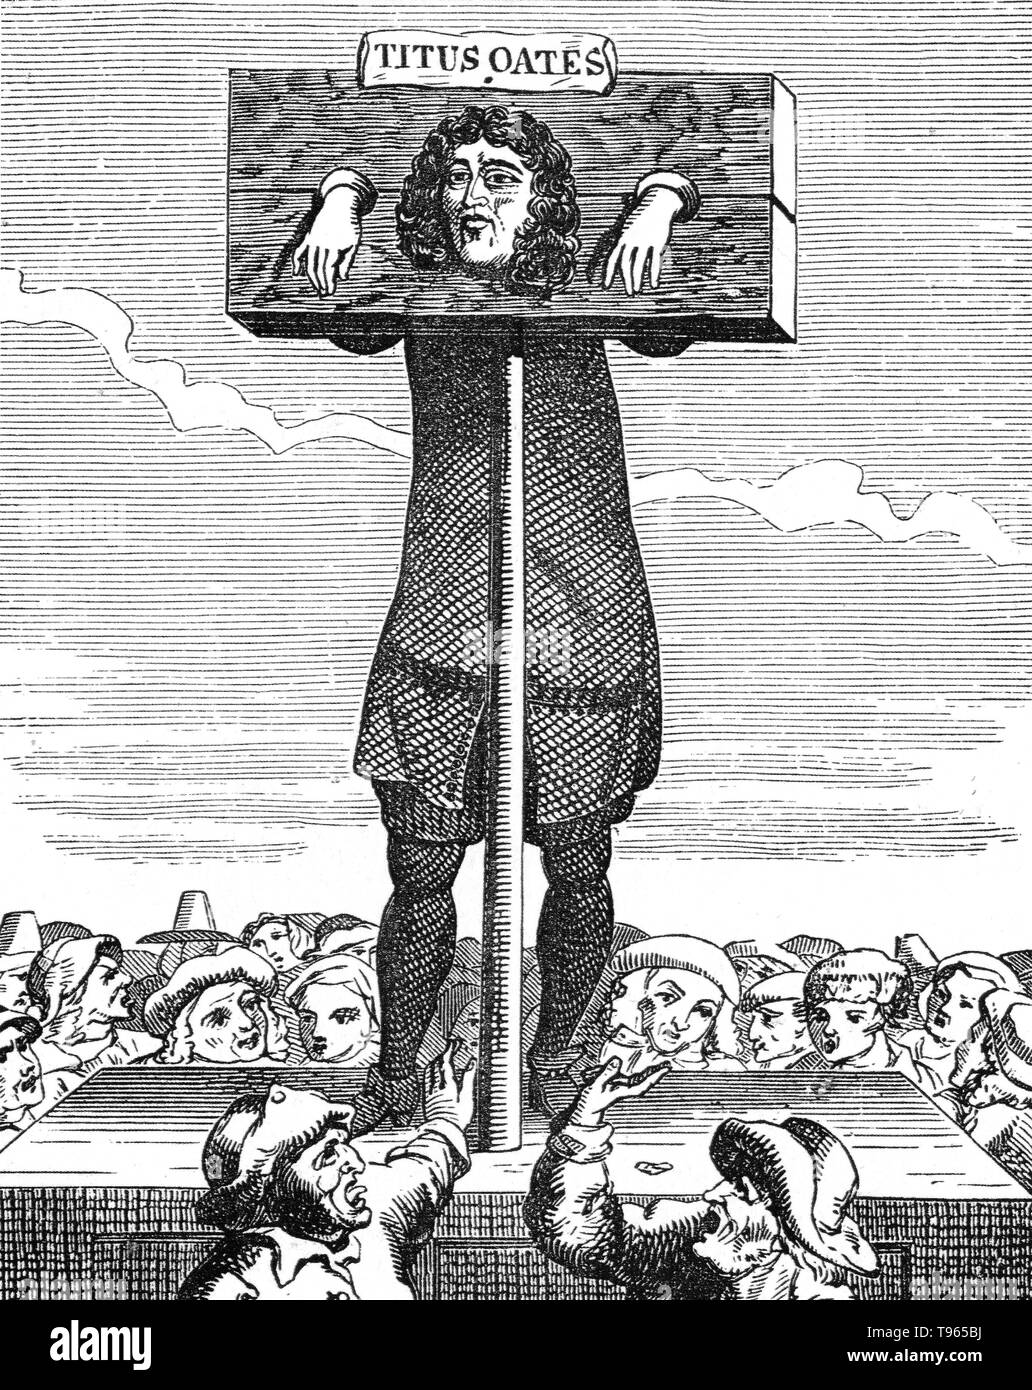 Titus Oates (September 15, 1649 - July 12/13, 1705) was an English perjurer who fabricated the Popish Plot a fictitious conspiracy concocted between 1678-81 that gripped the Kingdoms of England and Scotland in anti-Catholic hysteria. Oates alleged that there existed an extensive Catholic conspiracy to assassinate Charles II, accusations that led to the executions of at least 22 men. His web of accusations soon unravelled. He was arrested for sedition, sentenced to a fine and thrown into prison. Stock Photo